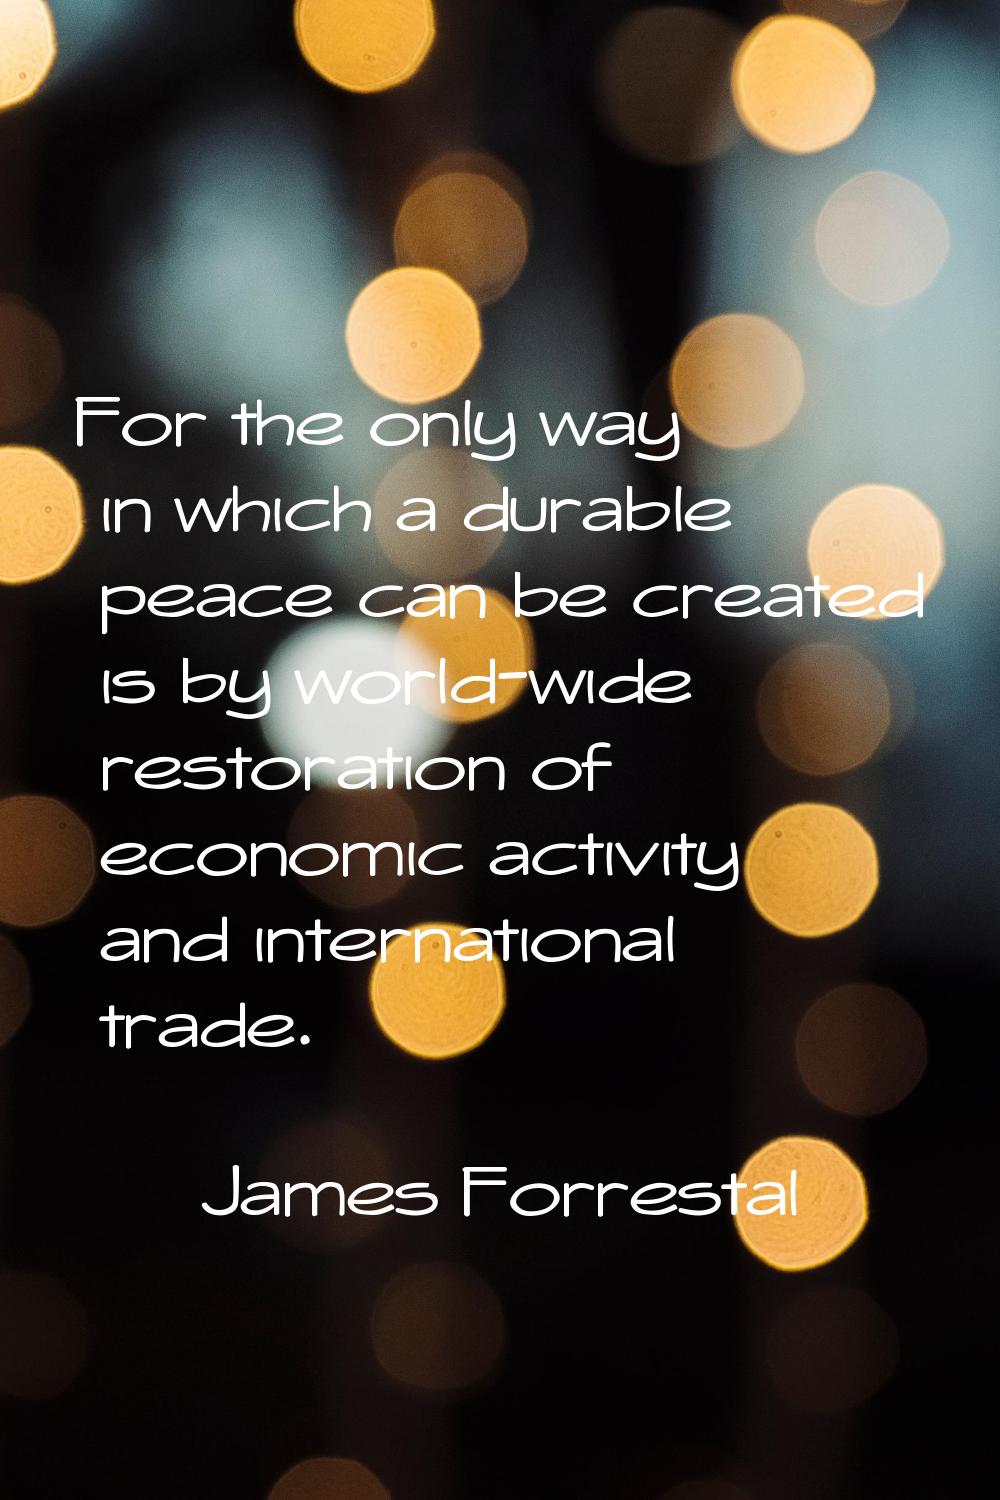 For the only way in which a durable peace can be created is by world-wide restoration of economic a